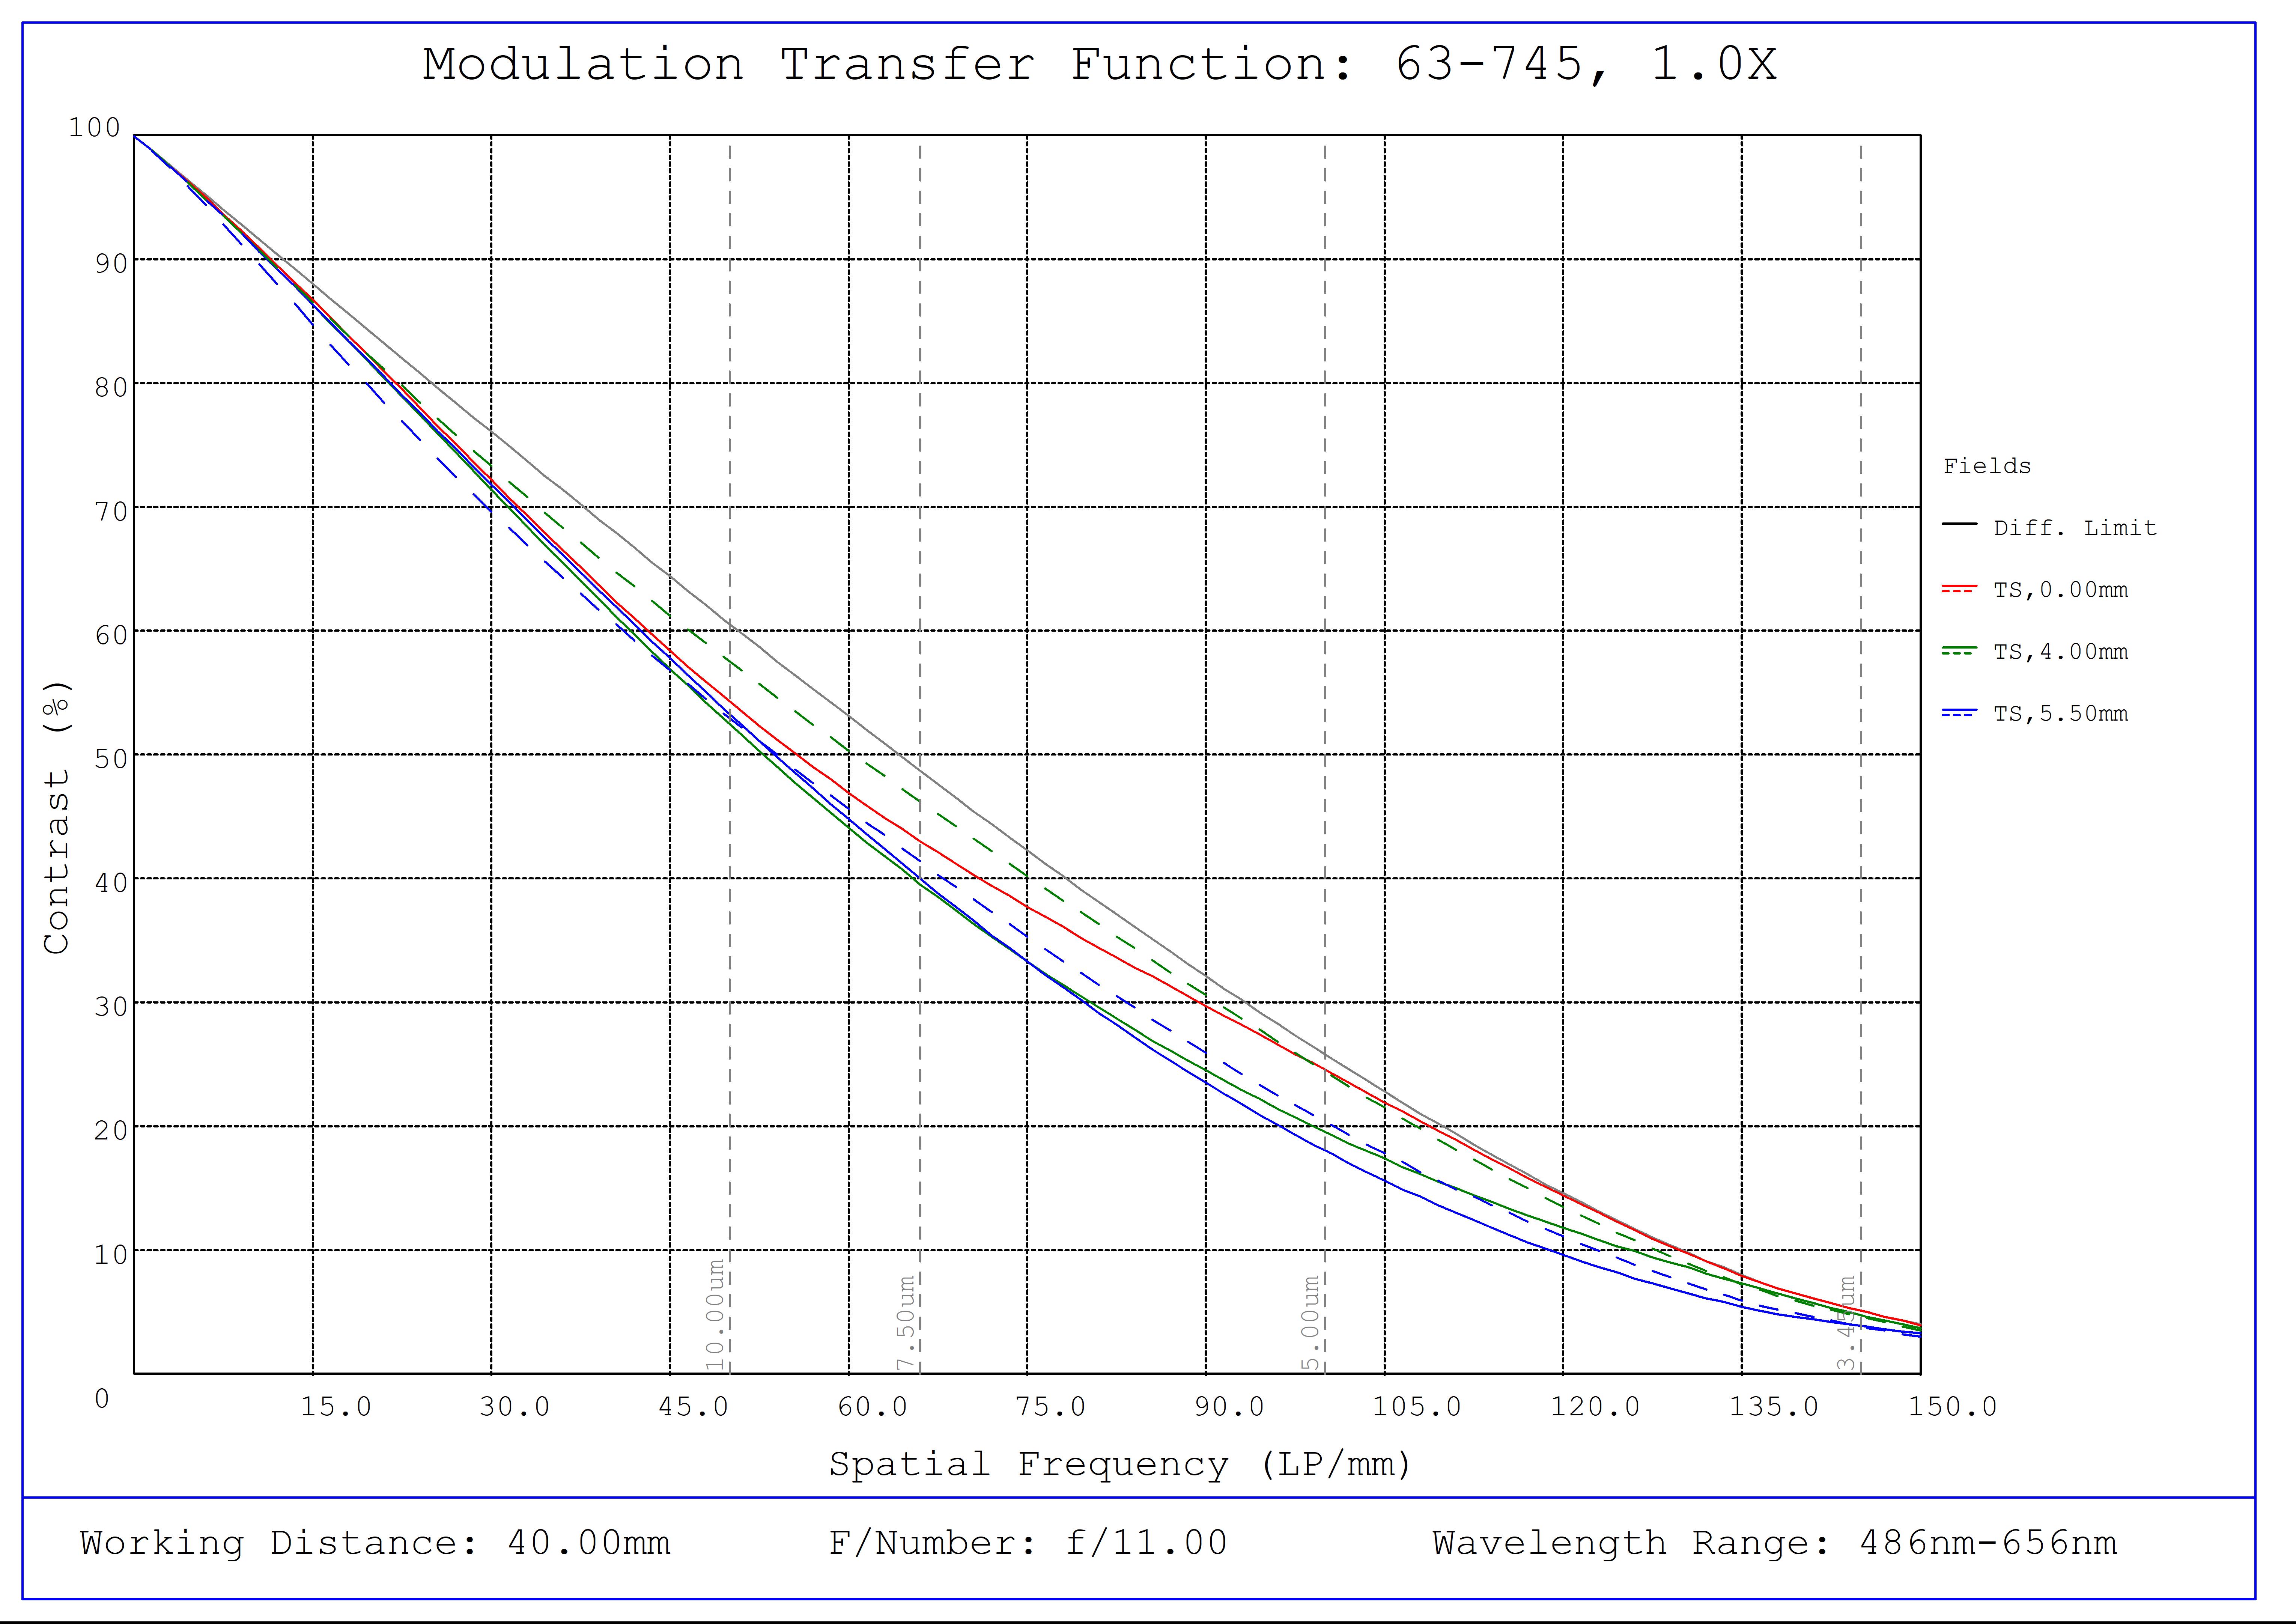 #63-745, 1X, 40mm WD CompactTL™ Telecentric Lens, Modulated Transfer Function (MTF) Plot, 40mm Working Distance, f11